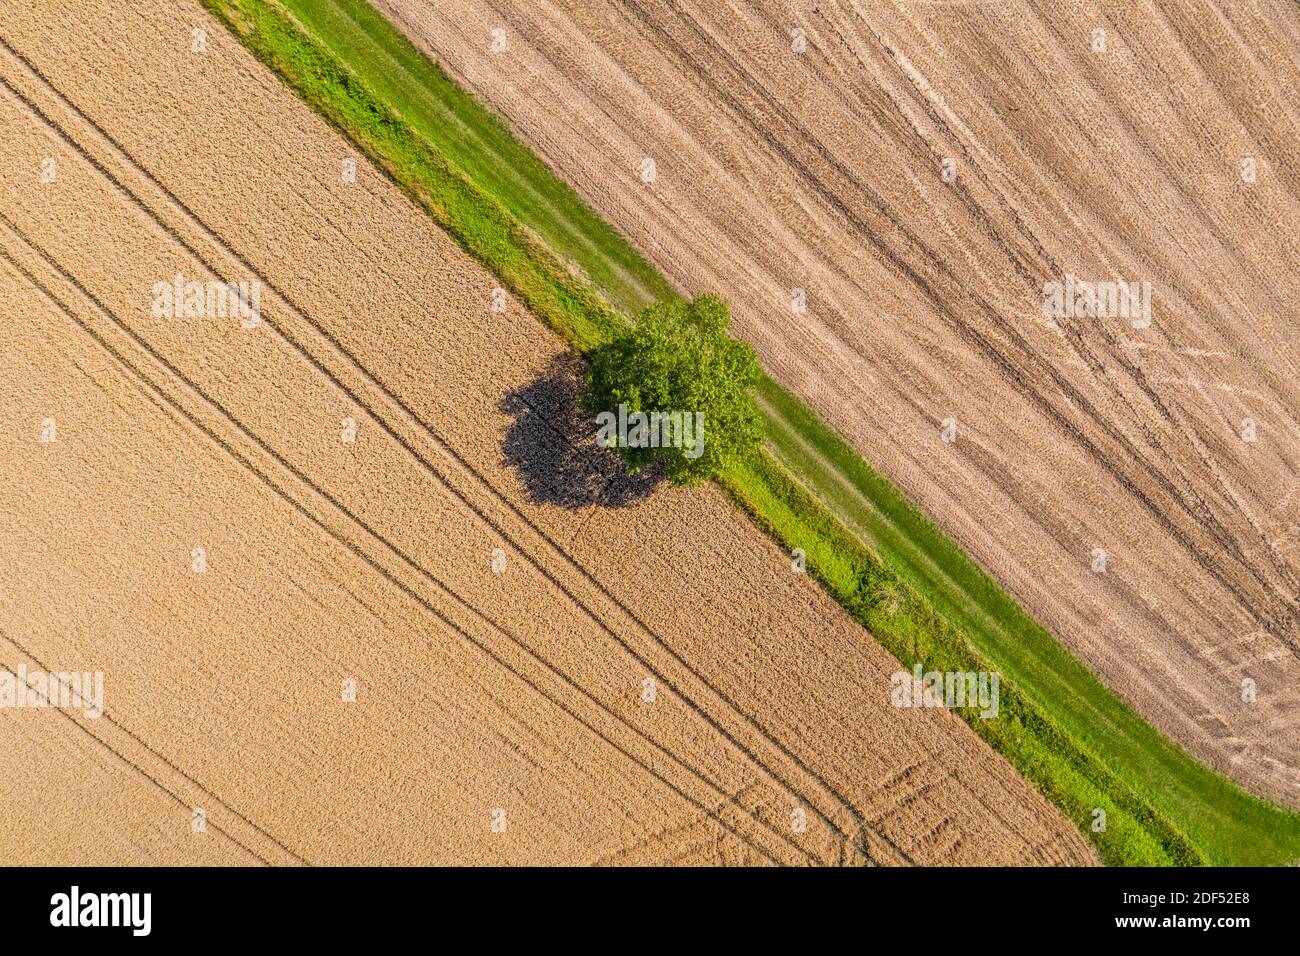 UK, England, Cambridgeshire, Wheatfield from above (drone view) Stock Photo